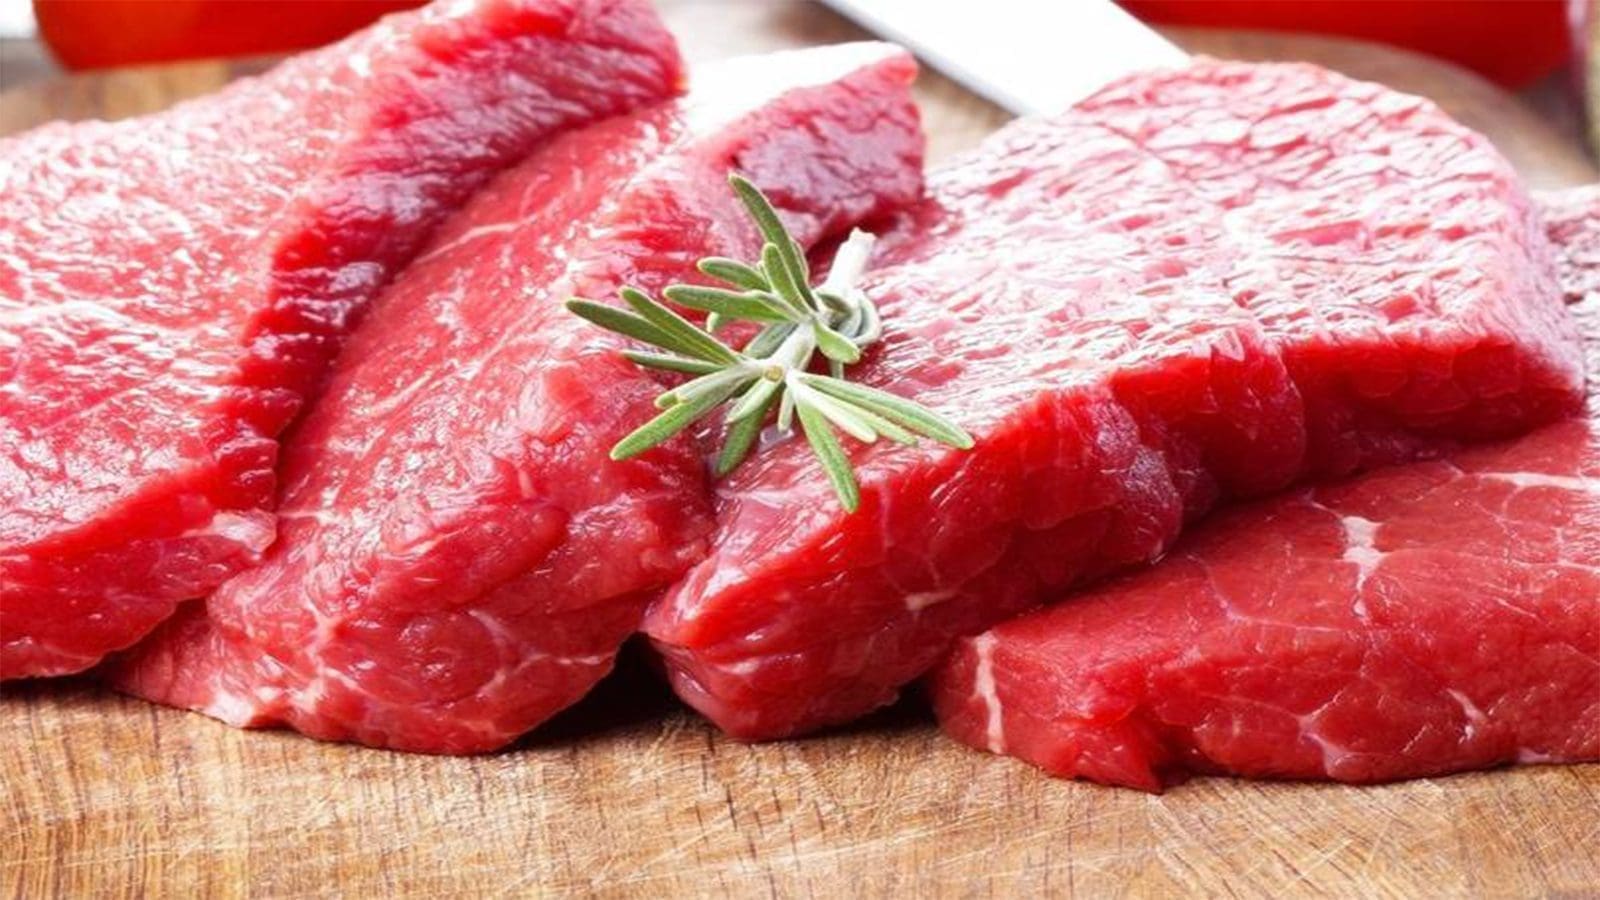 Researchers develop technology to detect putrescine in beef